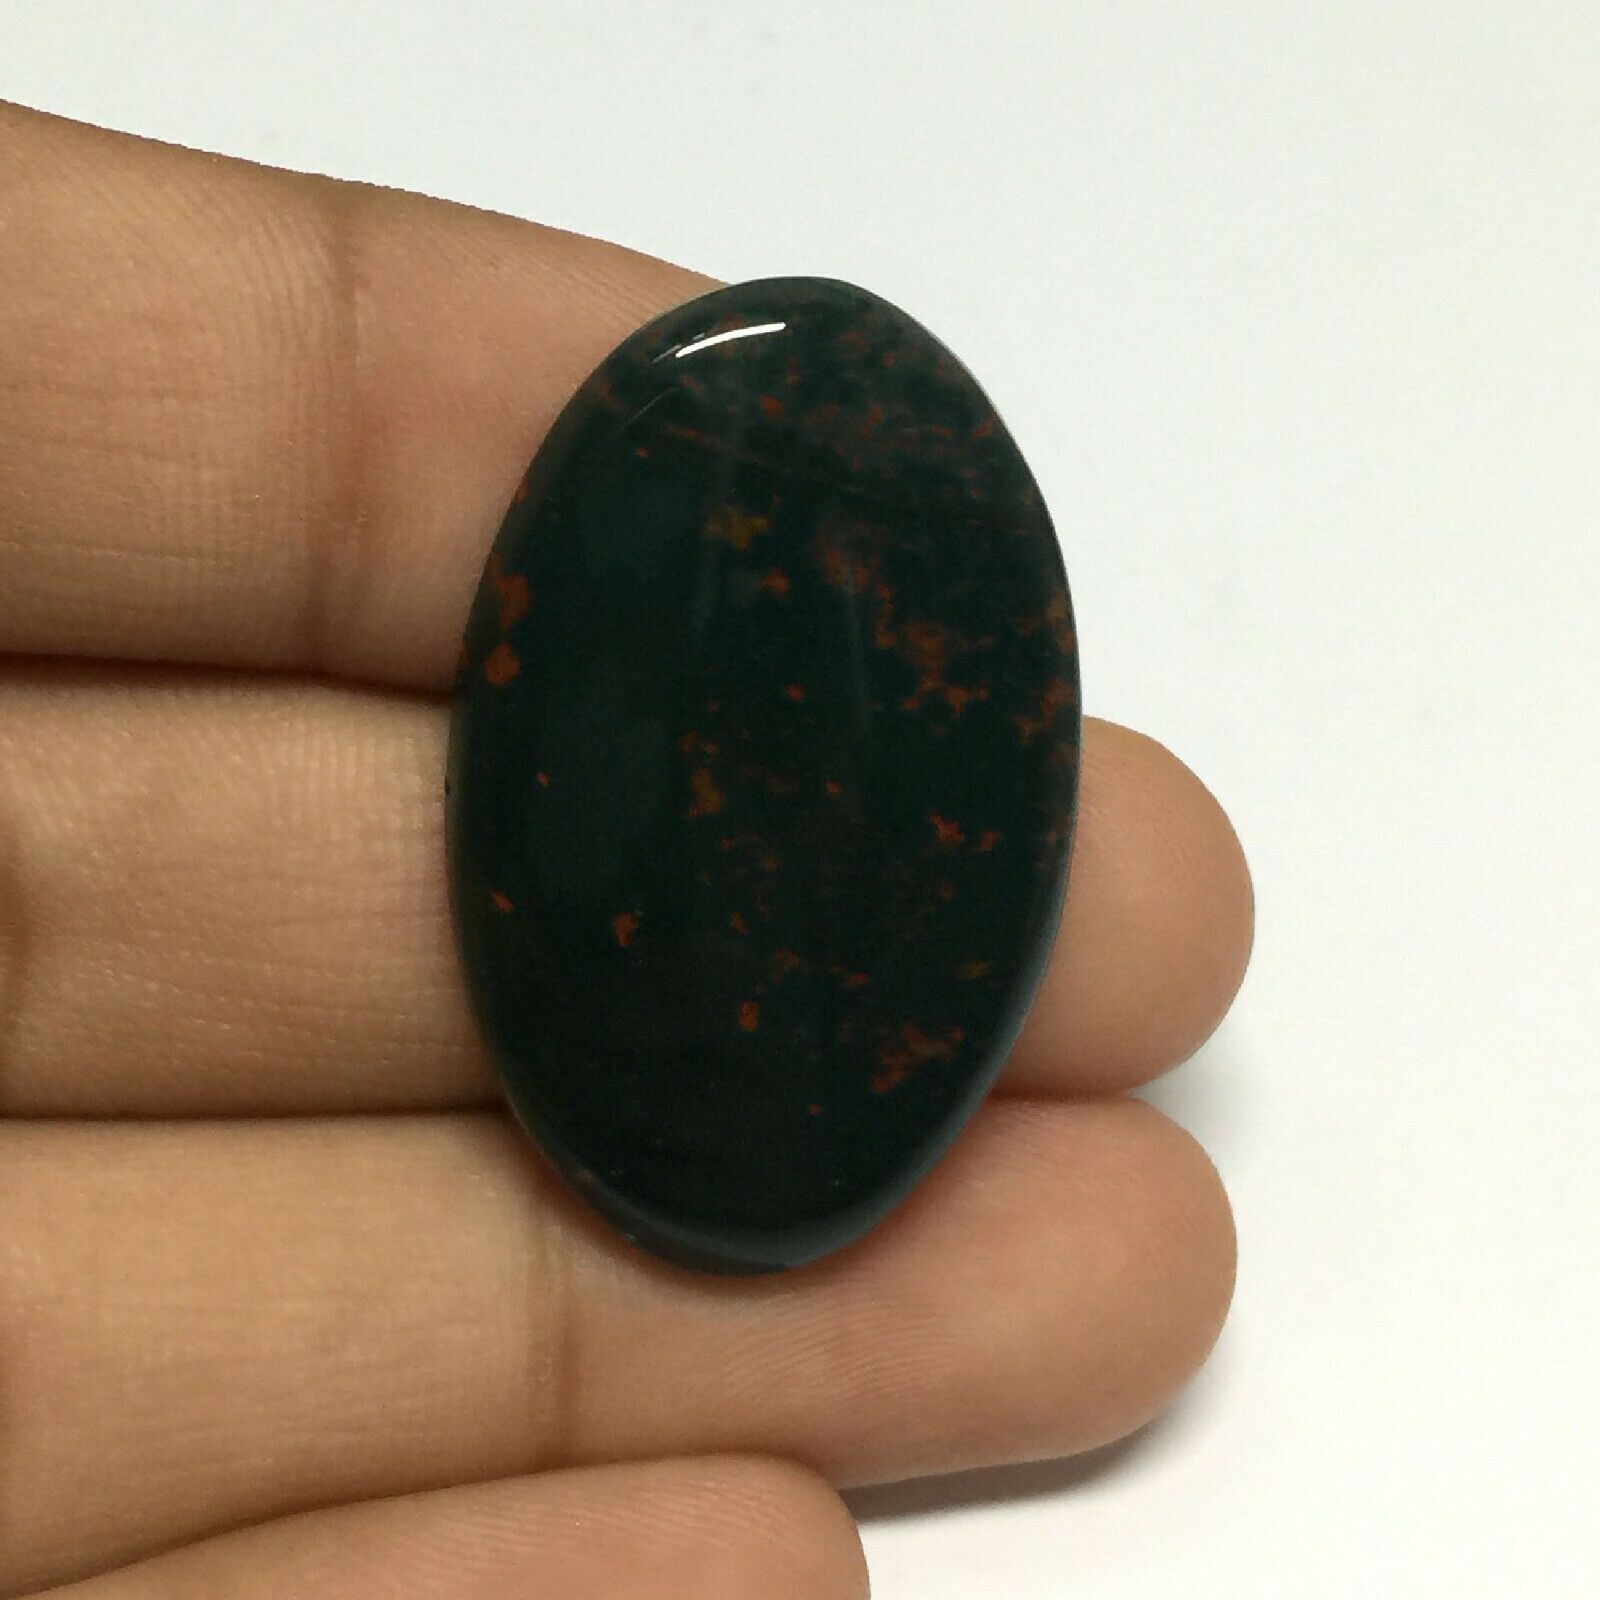 Attractive Bloodstone Gemstone Cabochon 30 Cts Upe-4b